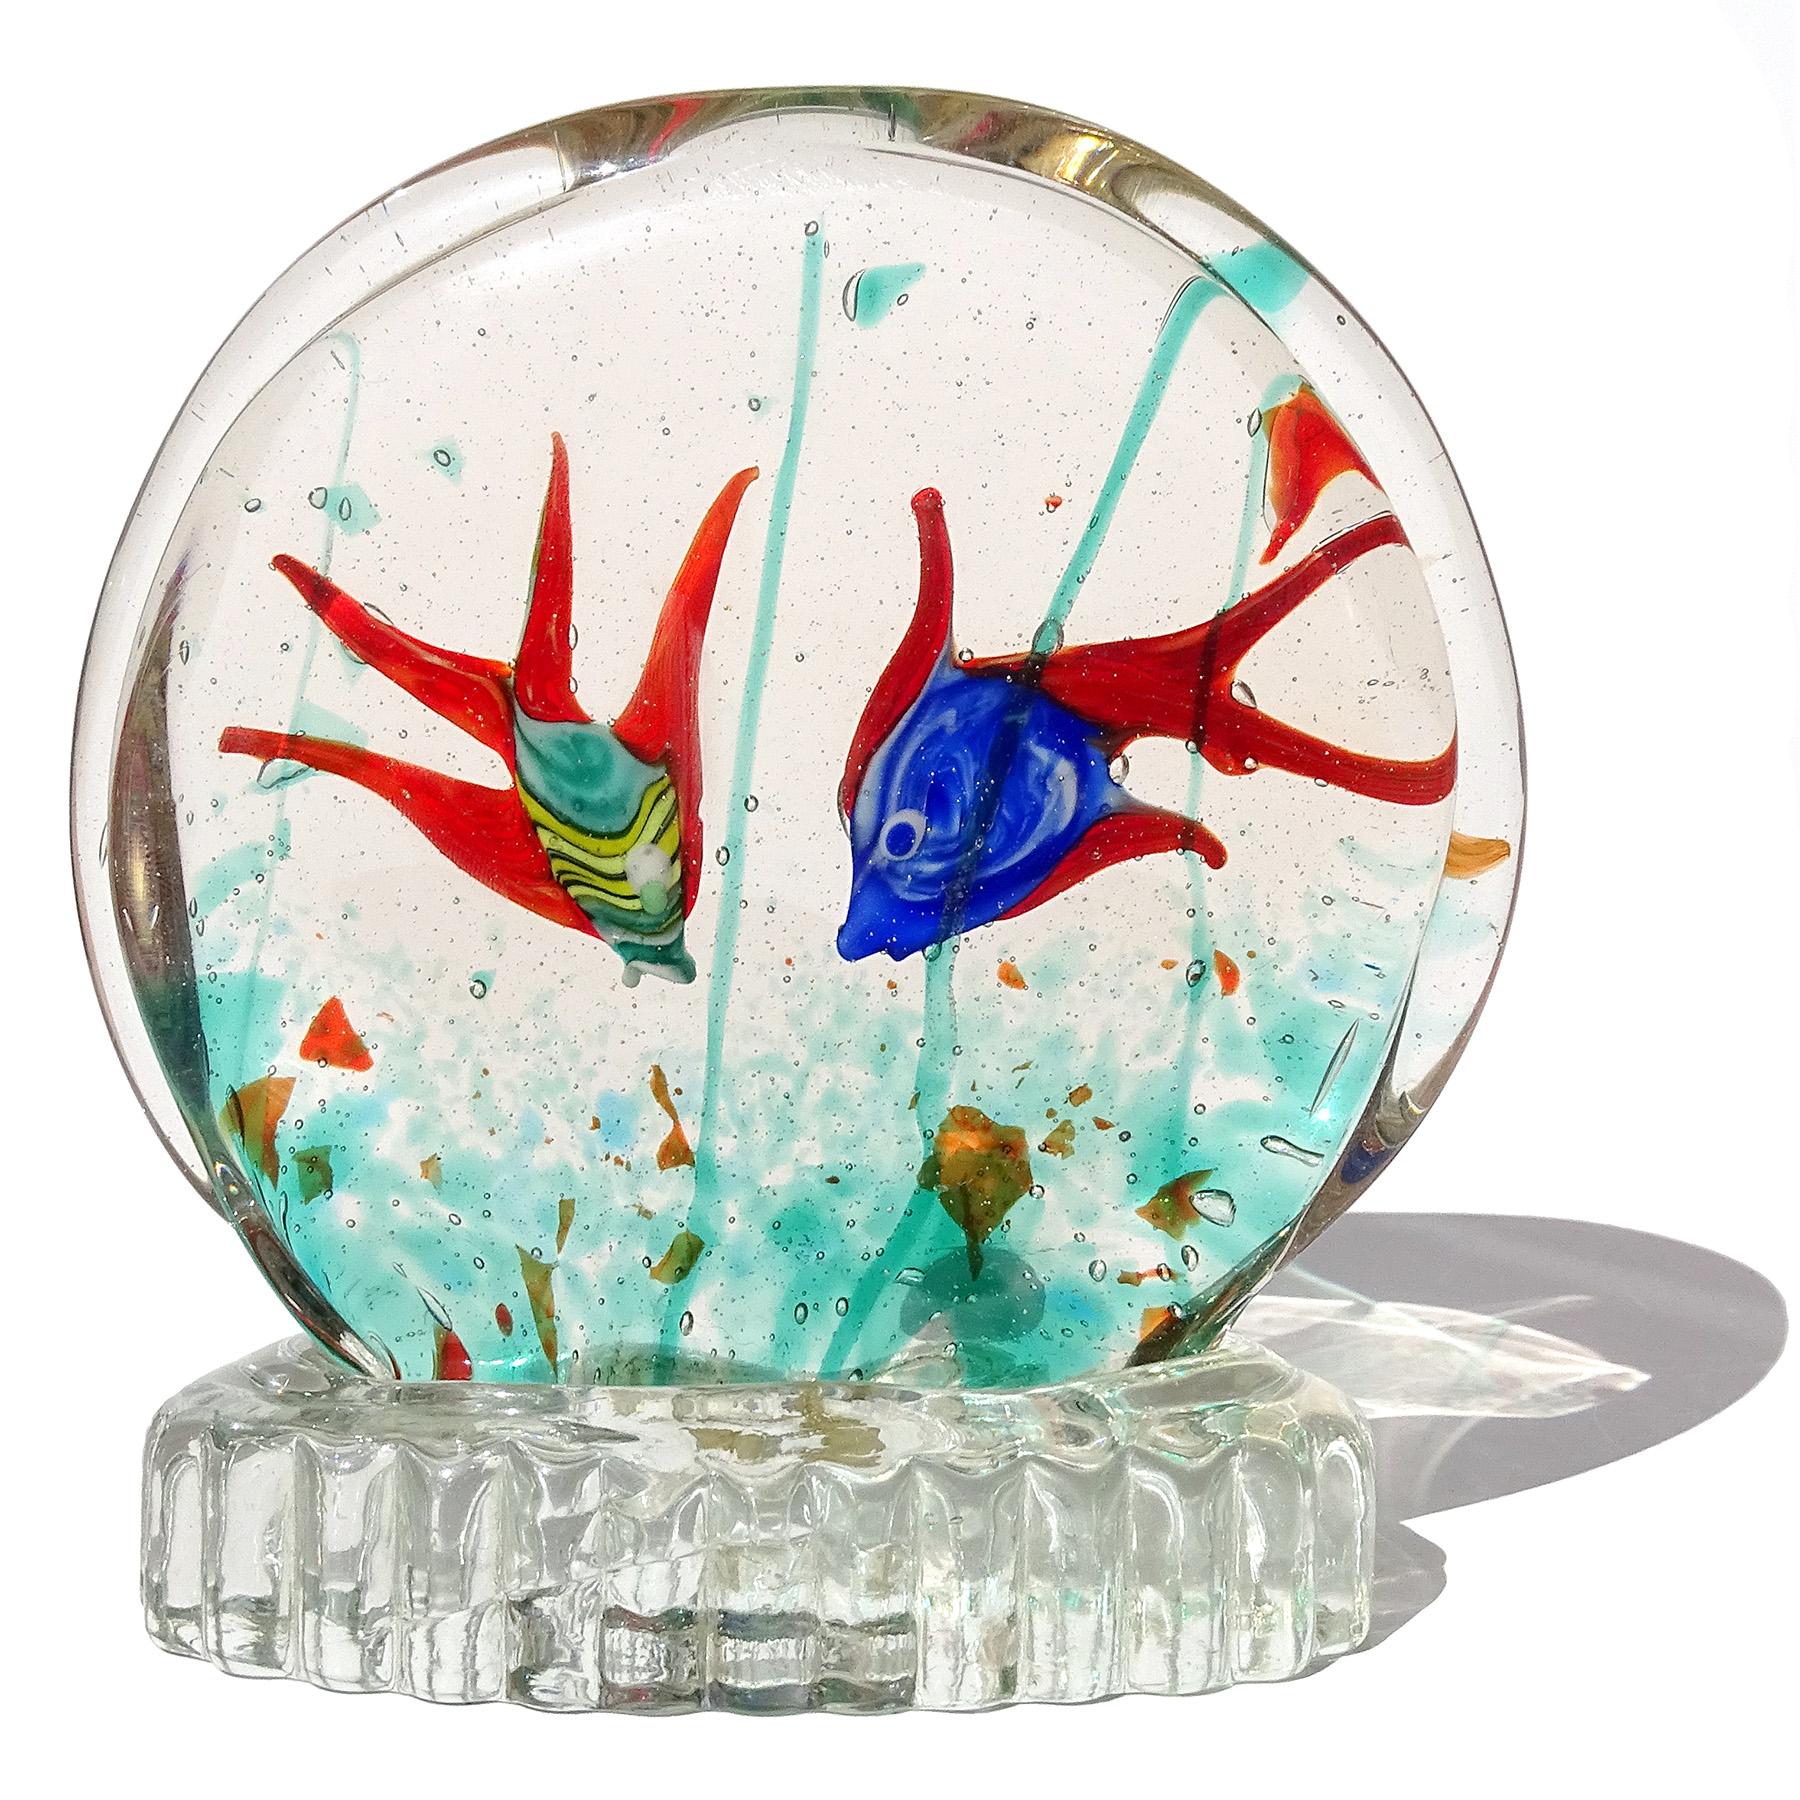 Beautiful vintage Murano hand blown Sommerso double fish aquarium Italian art glass sculpture. Created in the manner of designer Riccardo Licata and the Avem company. One fish has a cobalt blue and red fins design, and the other has a green and